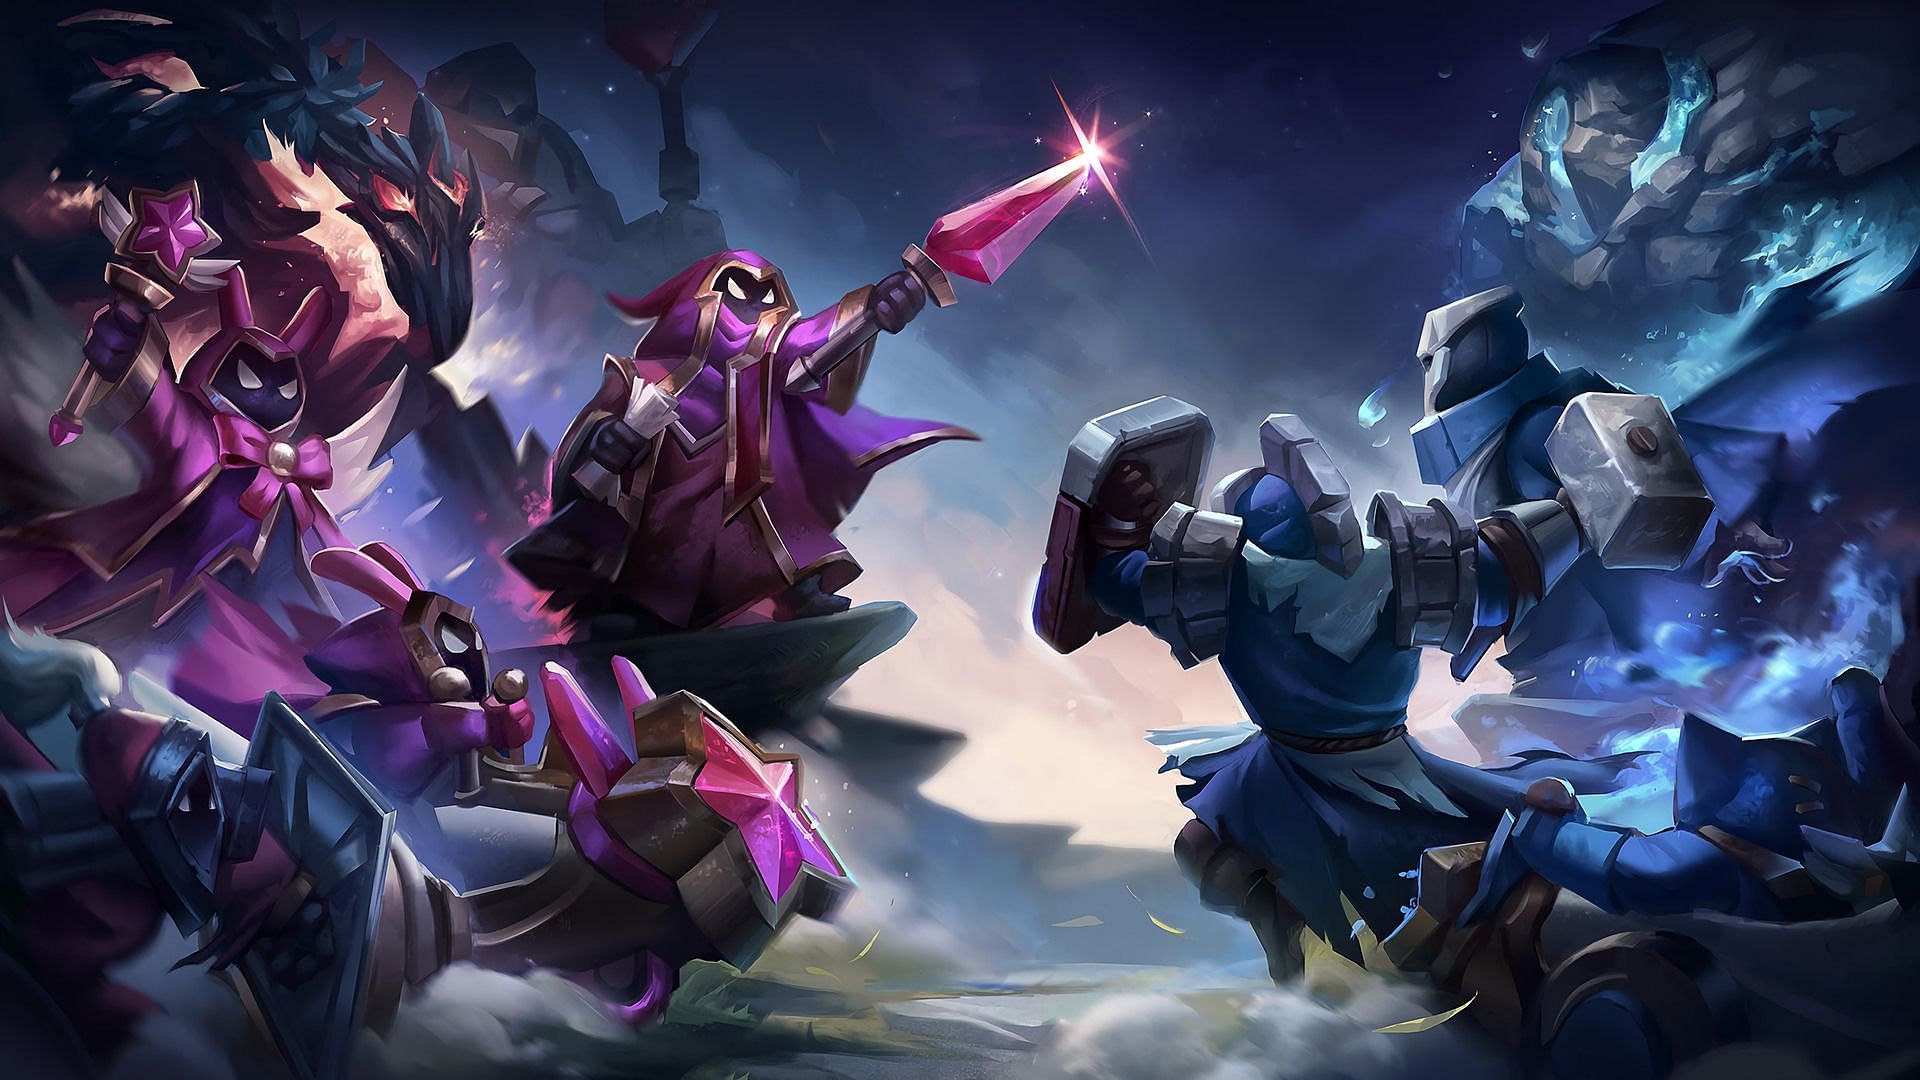 Minions were not shown love in the LoL durability update (Image via Riot Games)